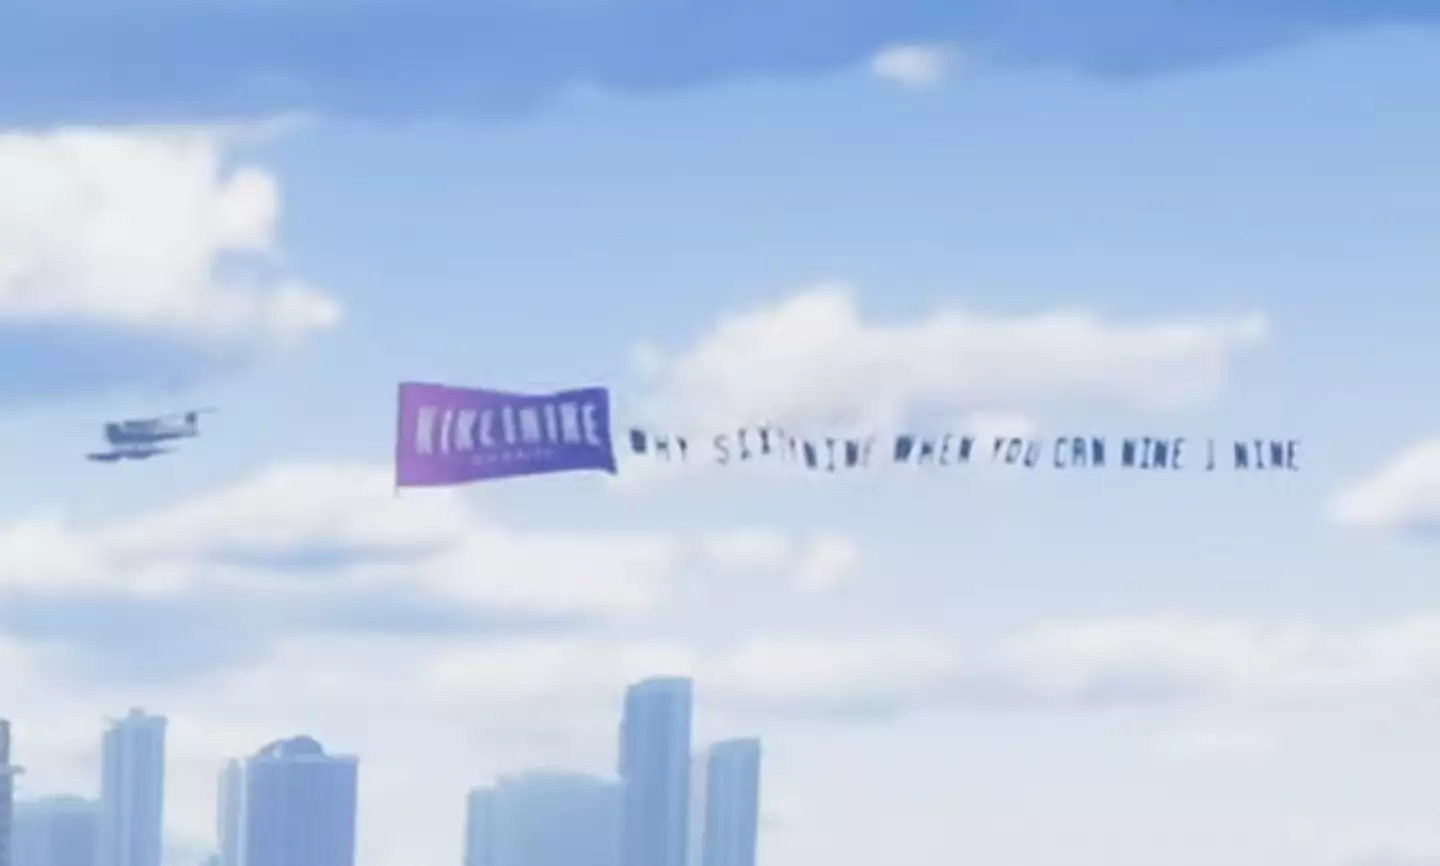 Eagle-eyed viewers think they've figured out the release date for GTA 6 through a hidden message in the trailer.